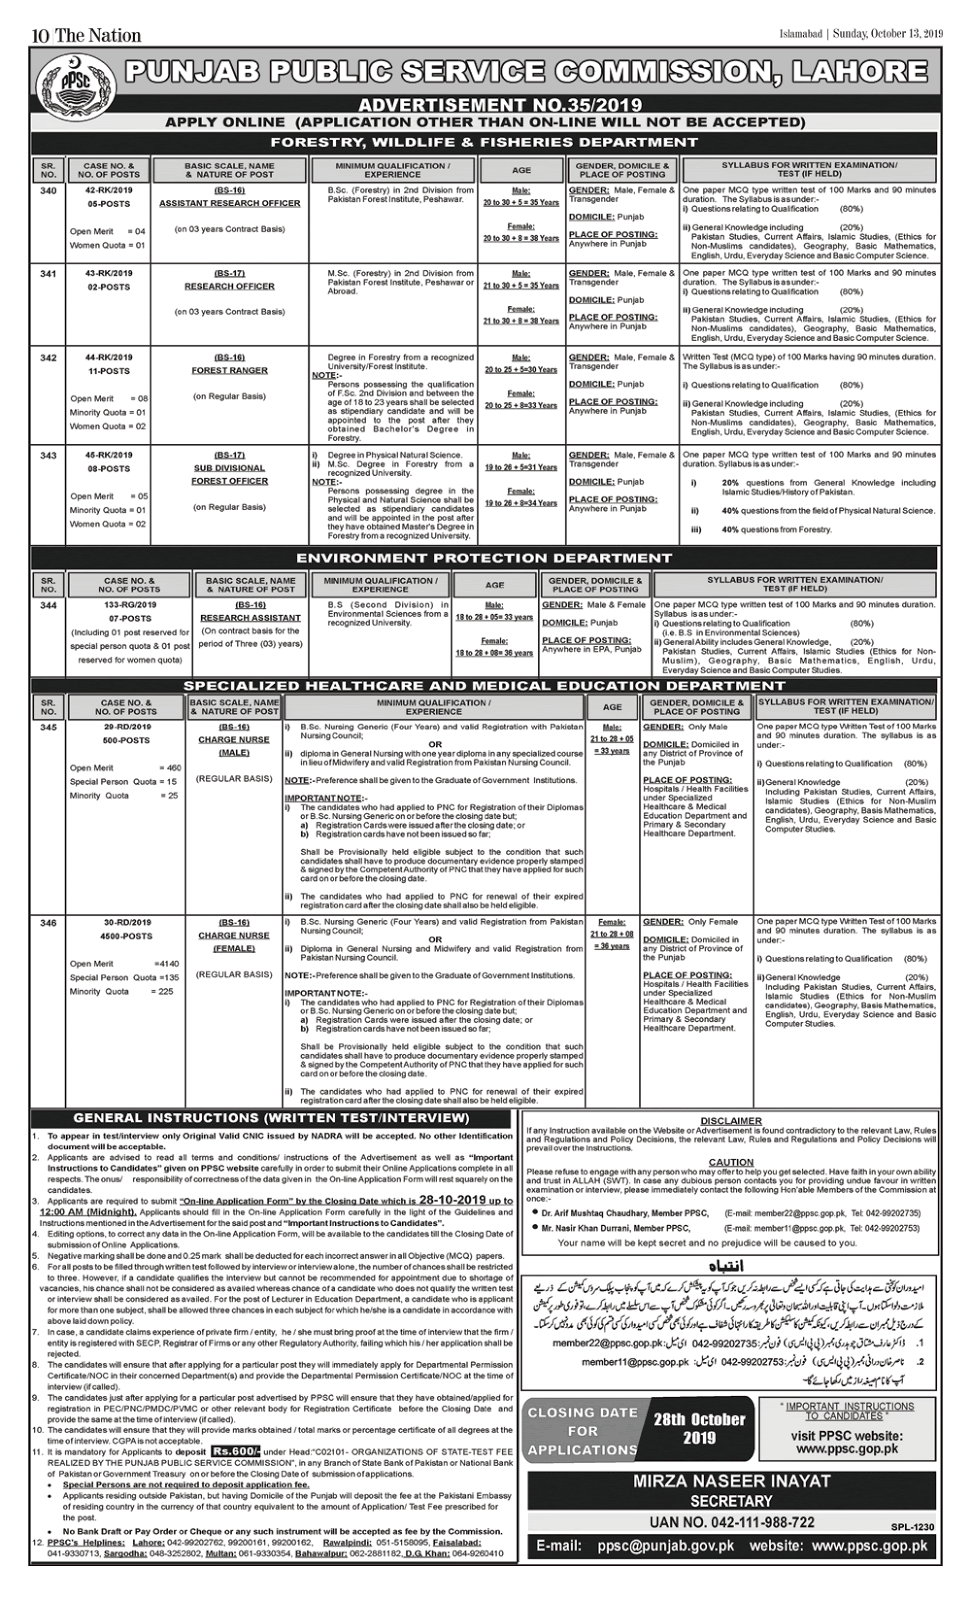 PPSC Jobs For 5000+Charge Nurse Vacancy October 2019 ppsc upcoming jobs 2019 for nurses fpsc nursing jobs 2019 nursing jobs in lahore hospitals government jobs for nurses in punjab ppsc head nurses jobs 2019 ppsc past papers for nursing instructor PPSC 5000 Charge Nurse Jobs 2019 Specialized Healthcare PPSC Jobs 13 October 2019 Charge Nurse 5000+ Vacancies PPSC Jobs October 2019 for Charge Nurse | 5000+ Vacancies Punjab Public Service Commission Ppsc Announced 5000 PPSC Jobs 5000+Charge Nurse